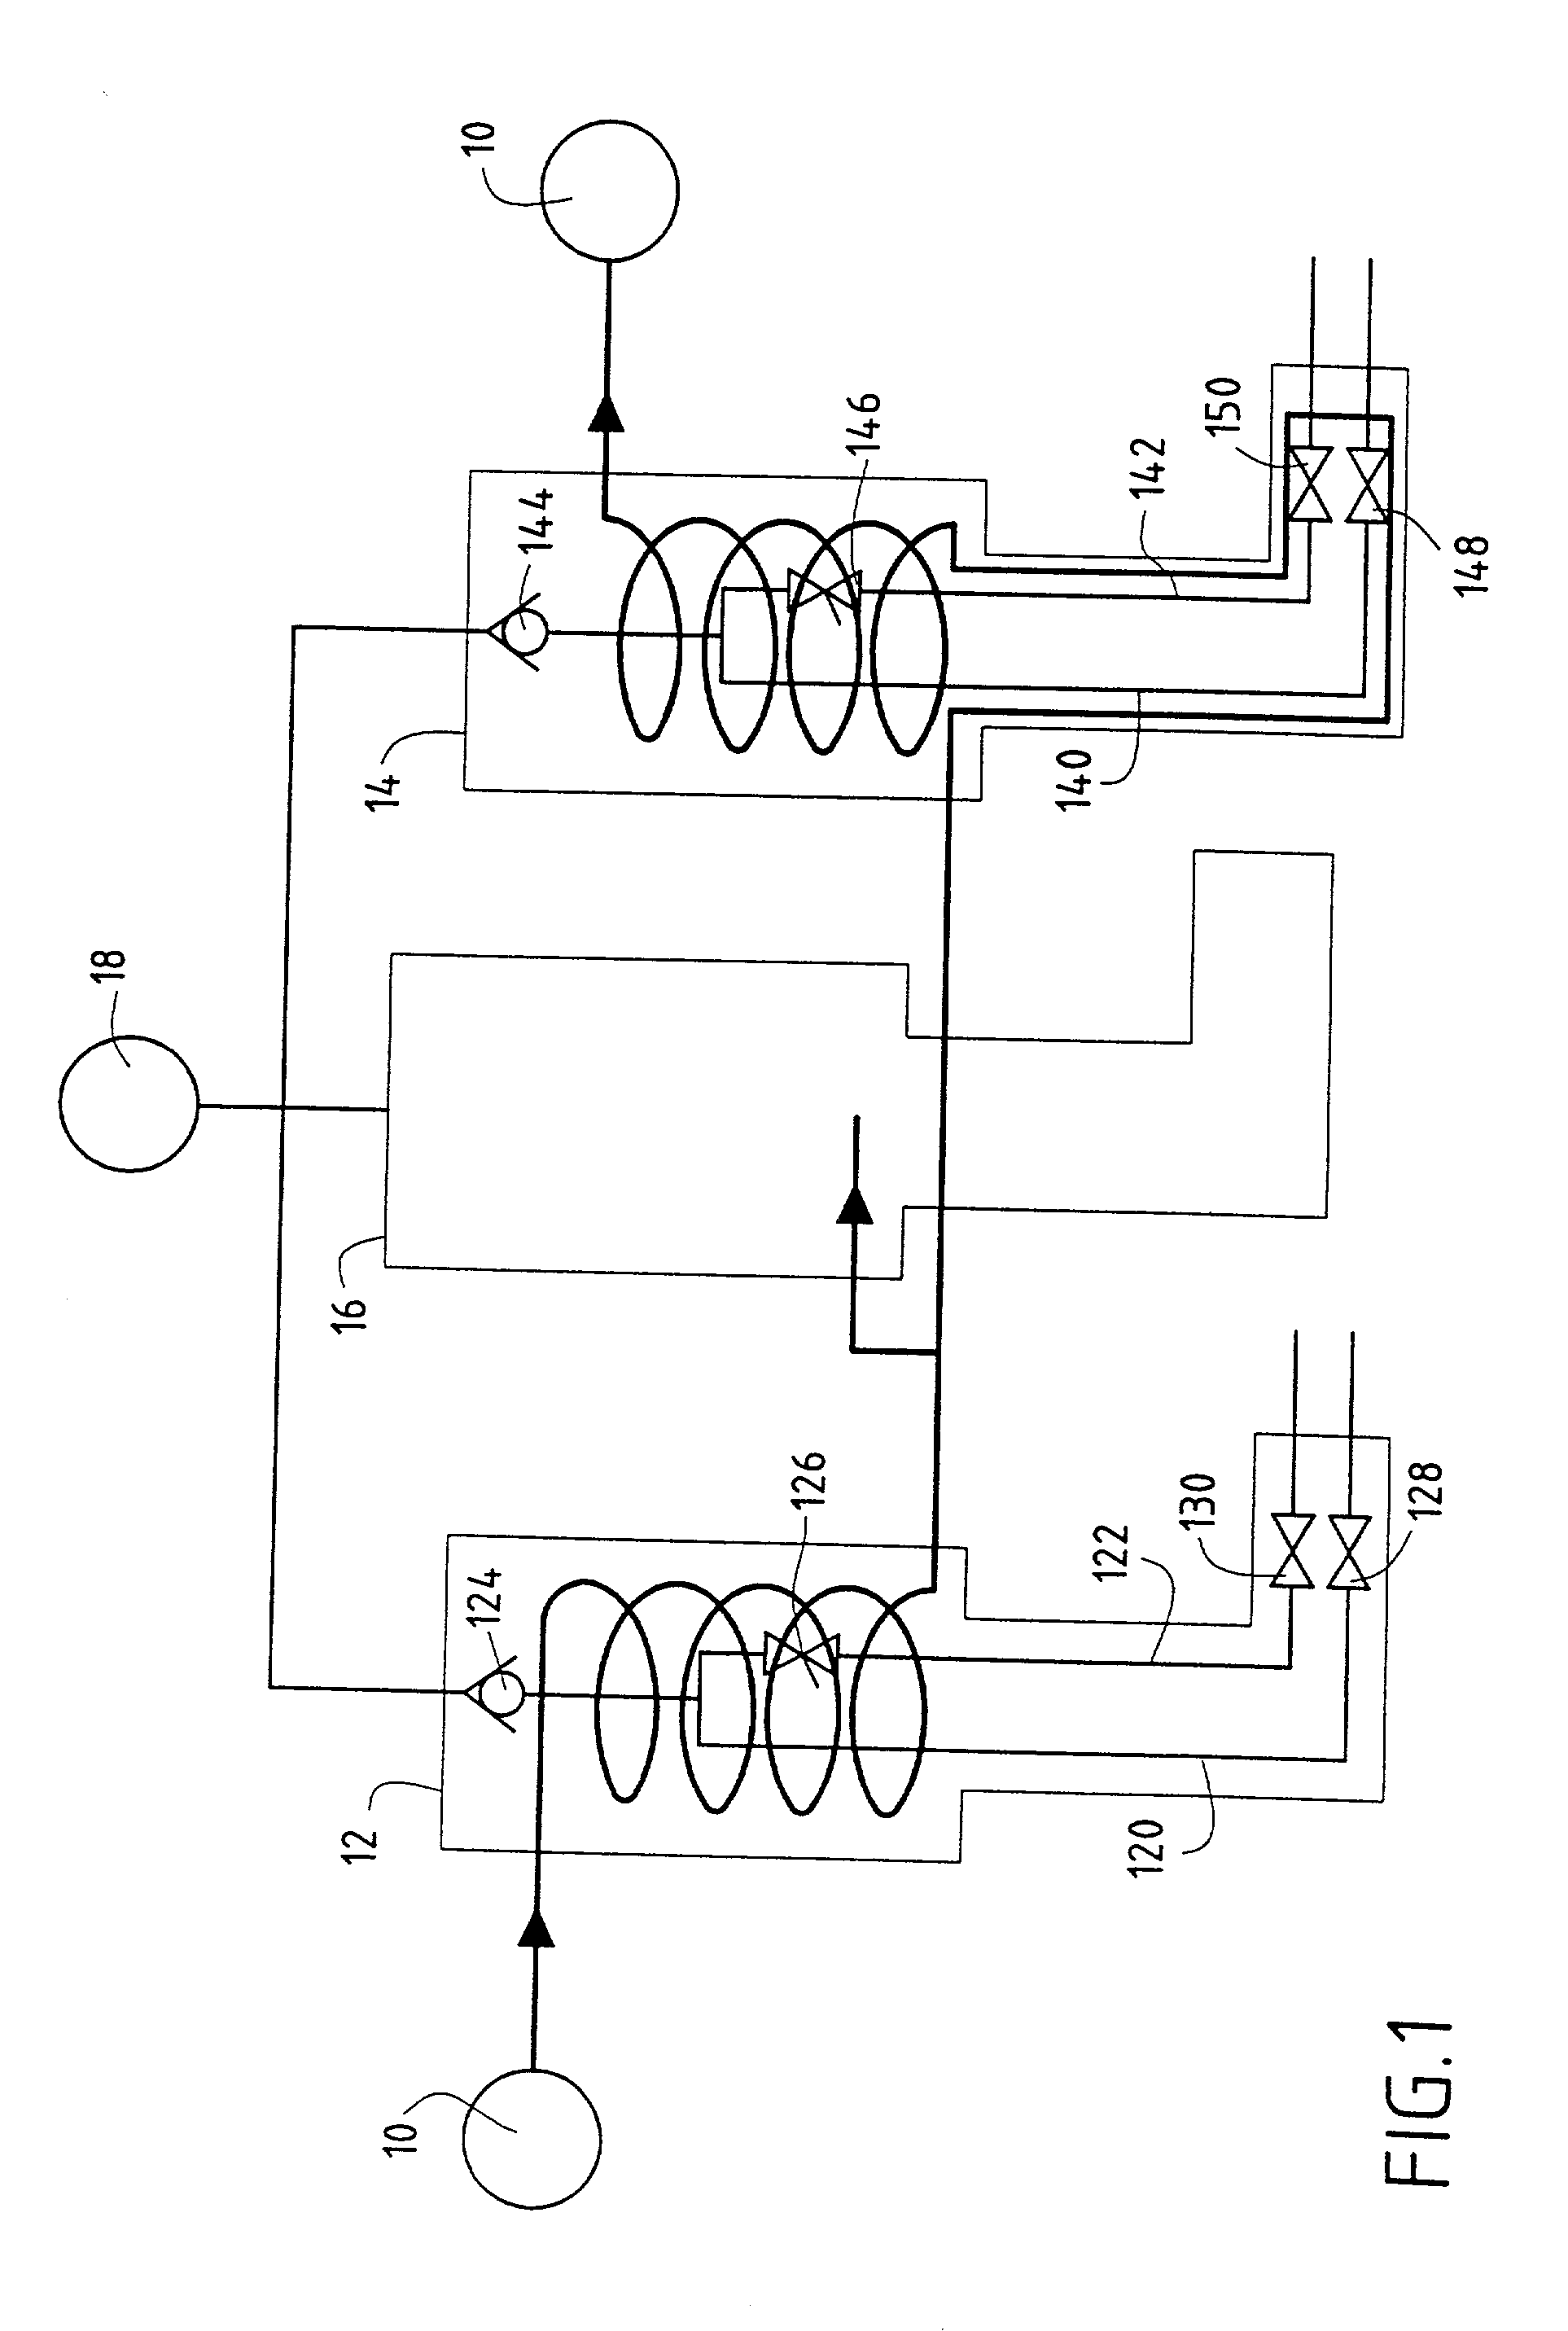 Method of assembling a fuel injector for the combustion chamber of a turbomachine